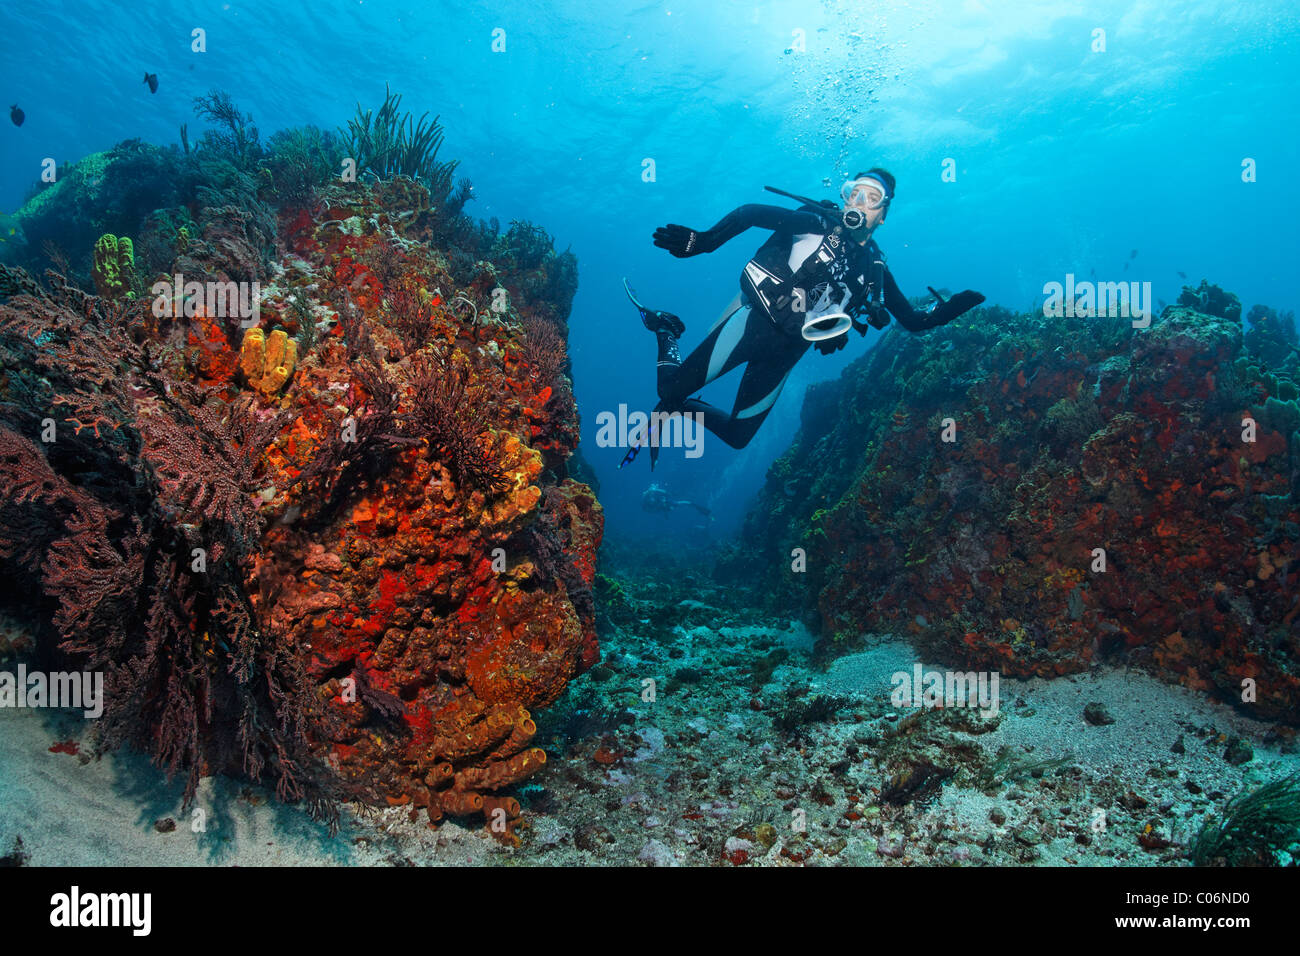 Diver in strong currents, coral reef, Little Tobago, Speyside, Trinidad and Tobago, Lesser Antilles, Caribbean Sea Stock Photo